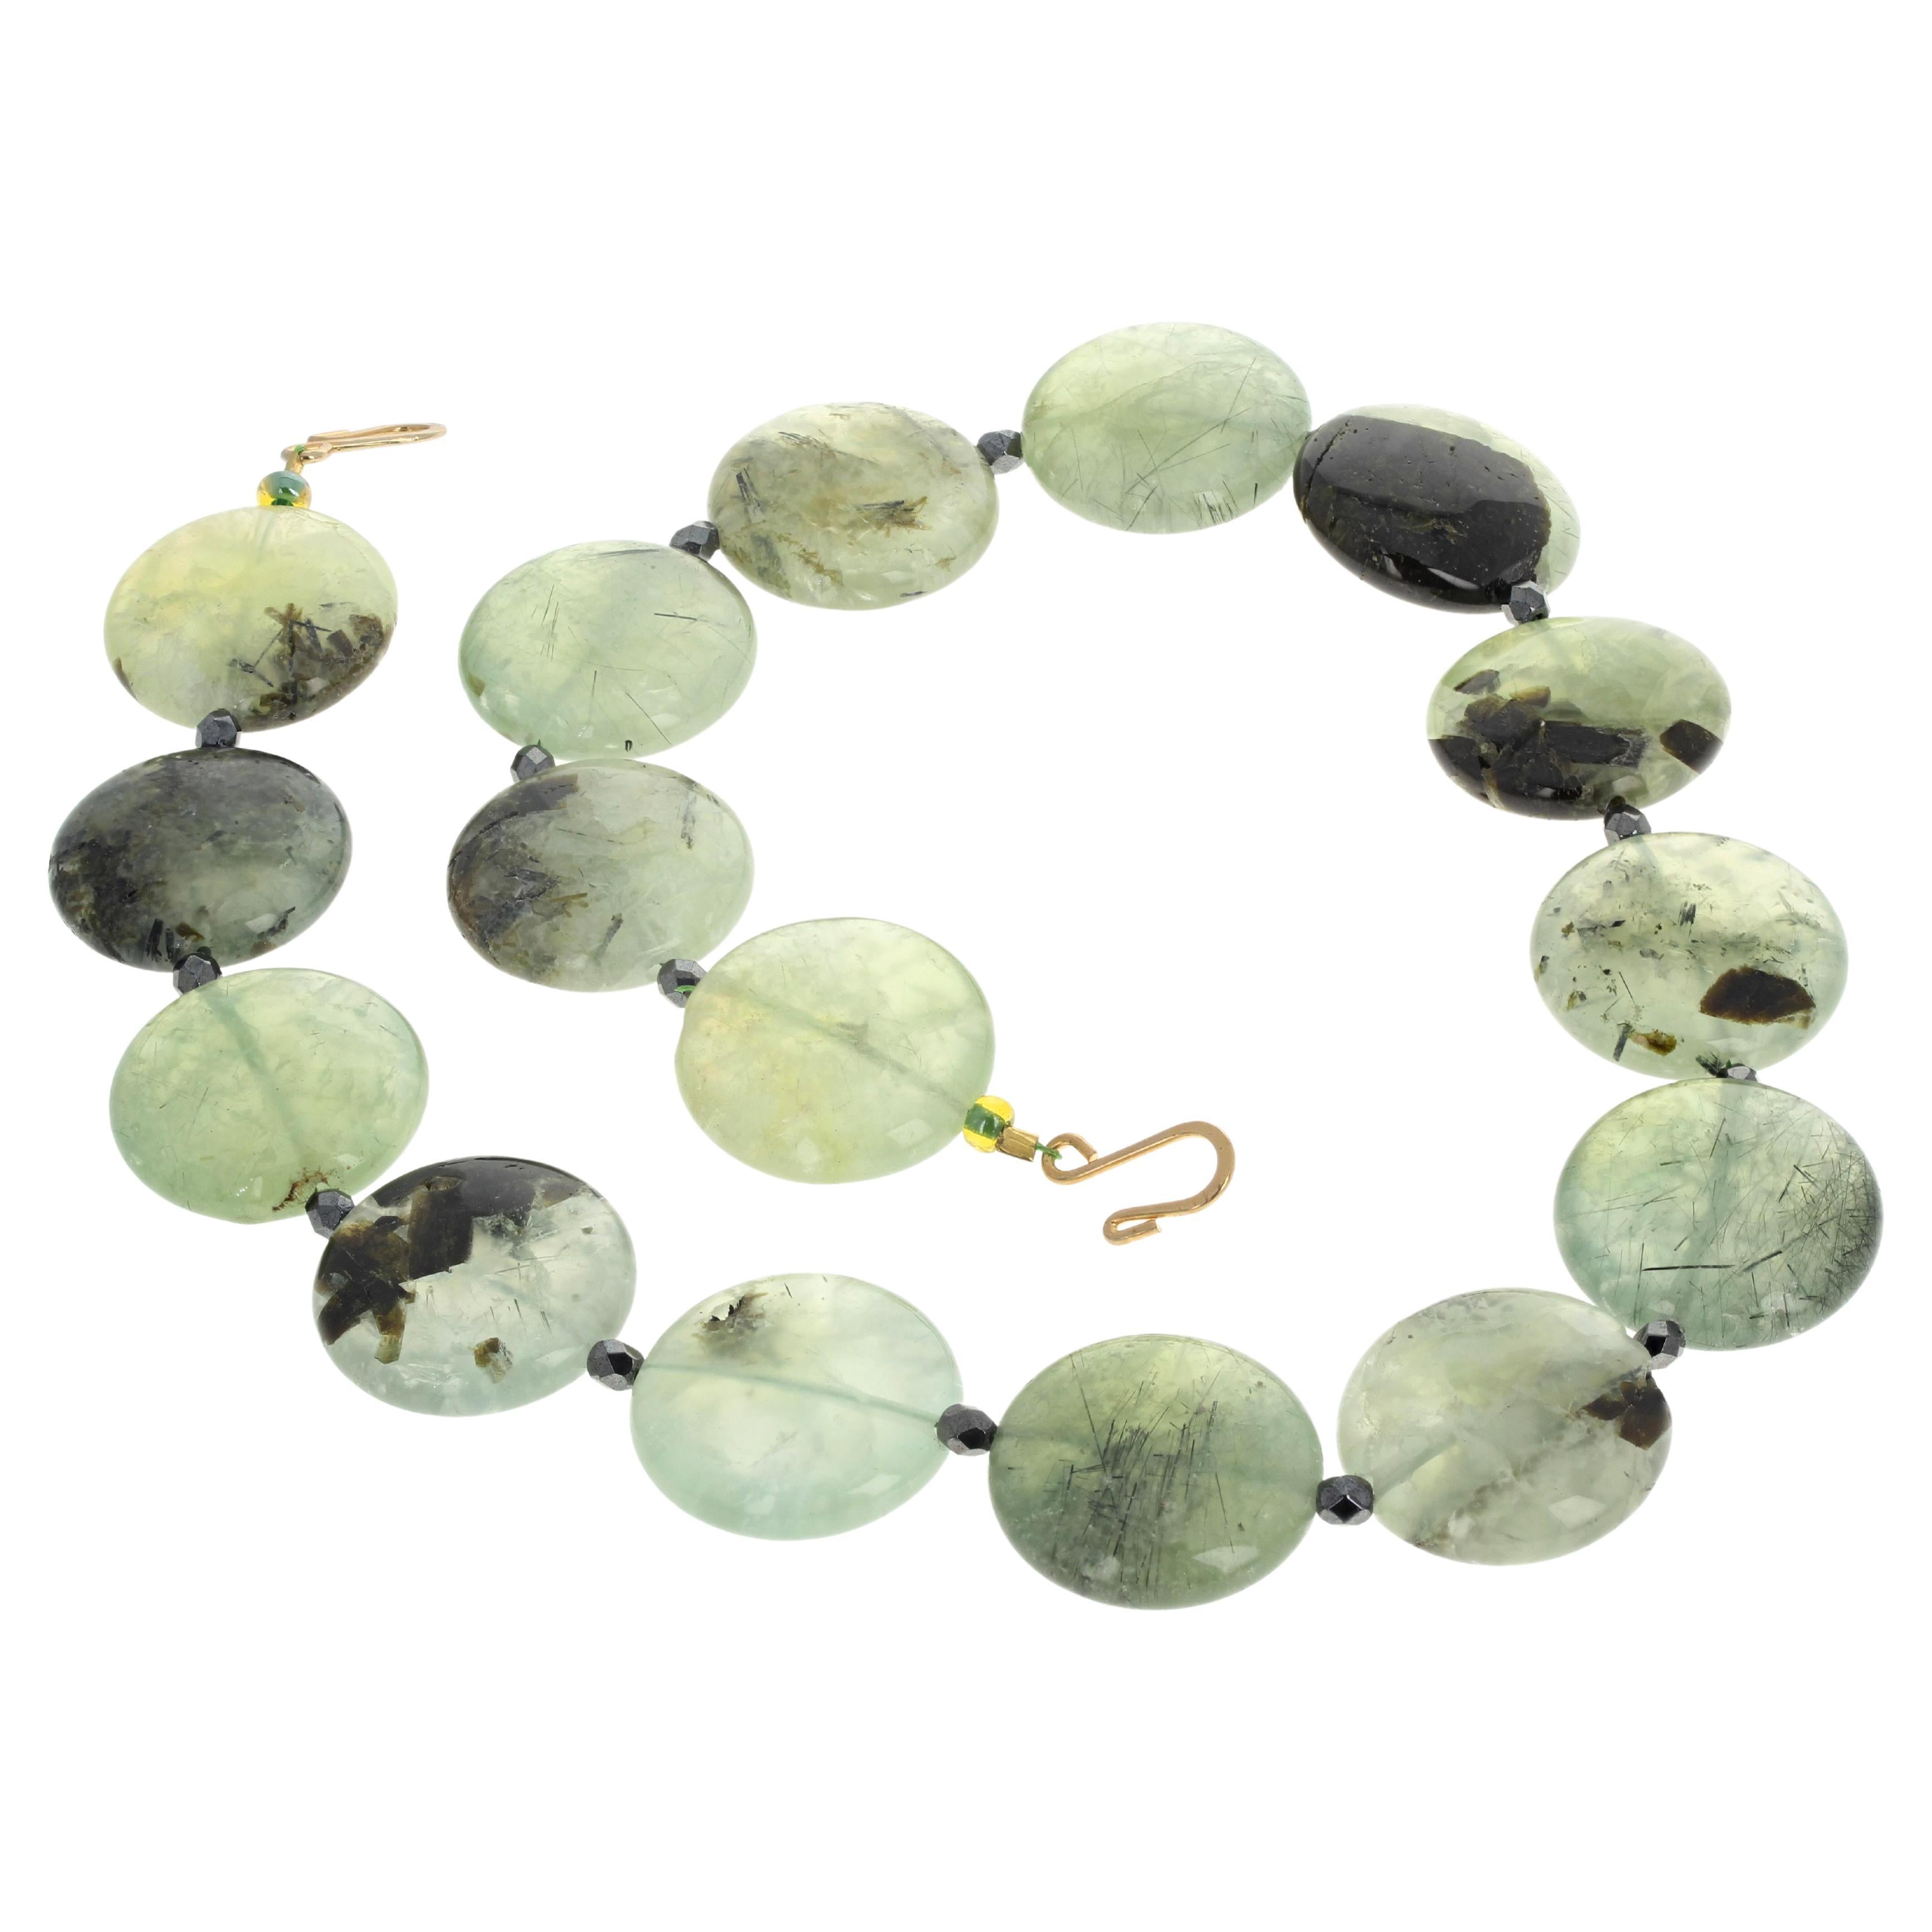 AJD Beautiful Natural Dramatically Artistic Real Prehnite Rondels Necklace For Sale